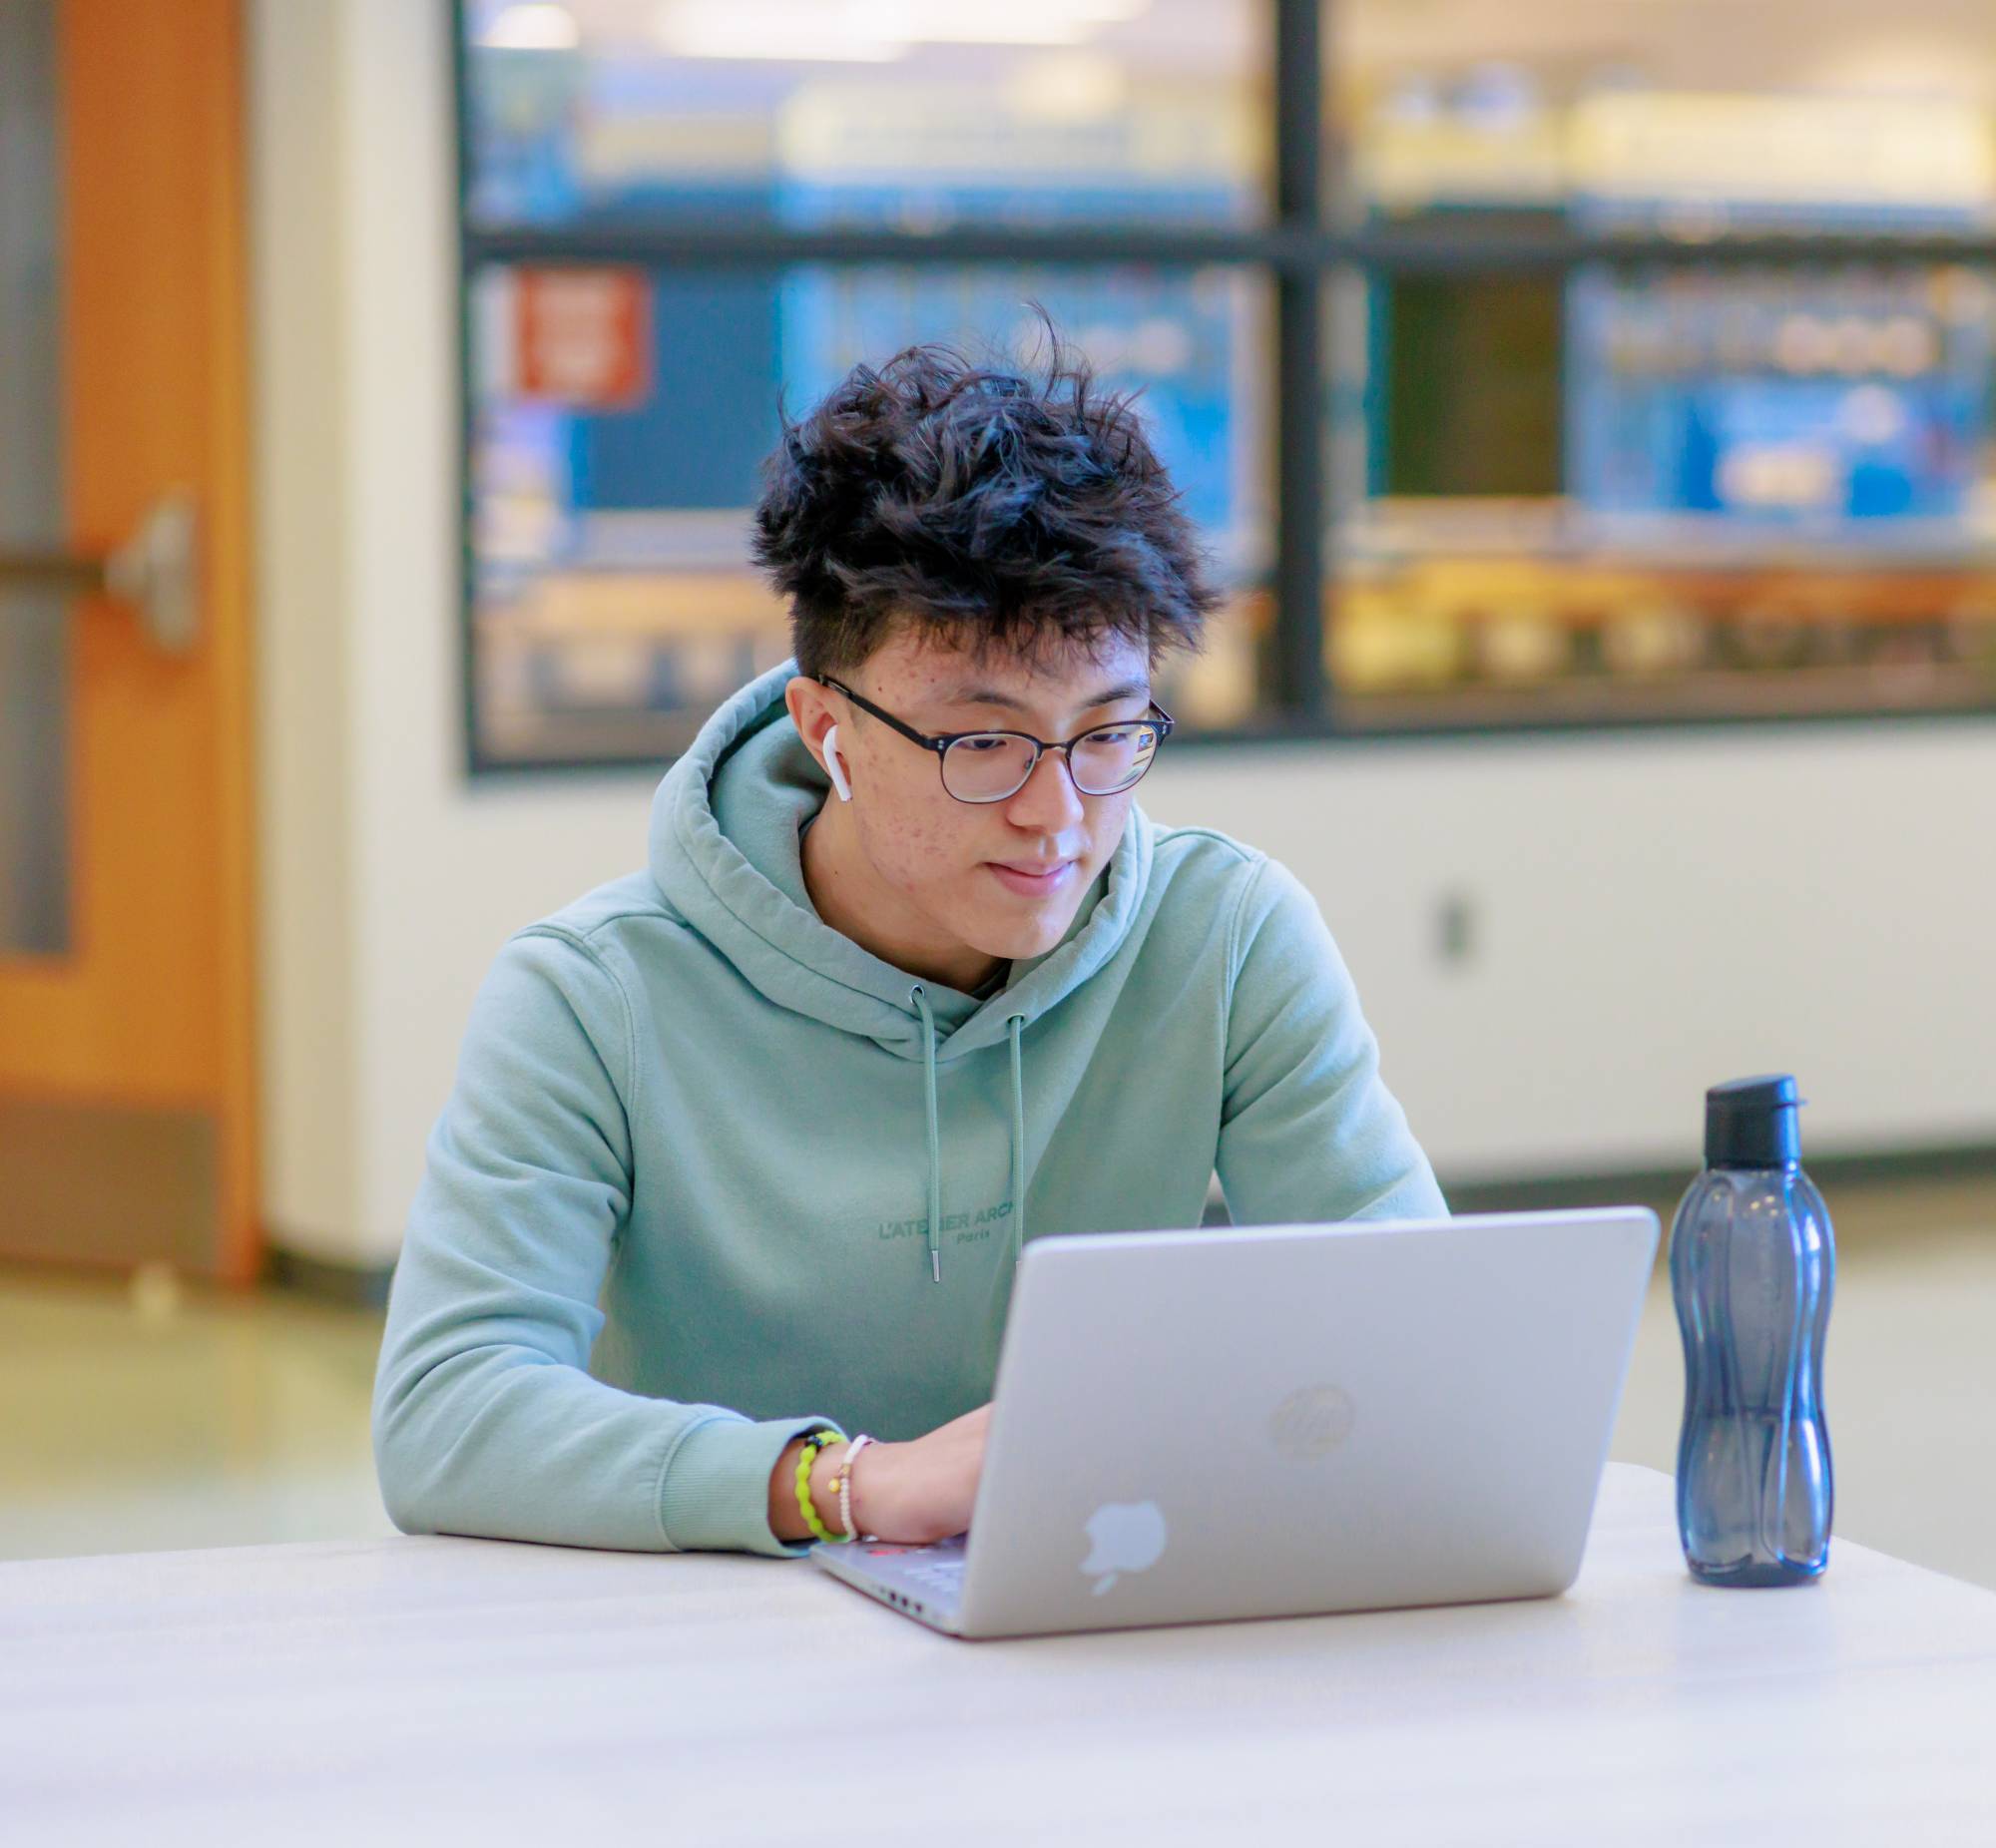 Male student looking at a computer.